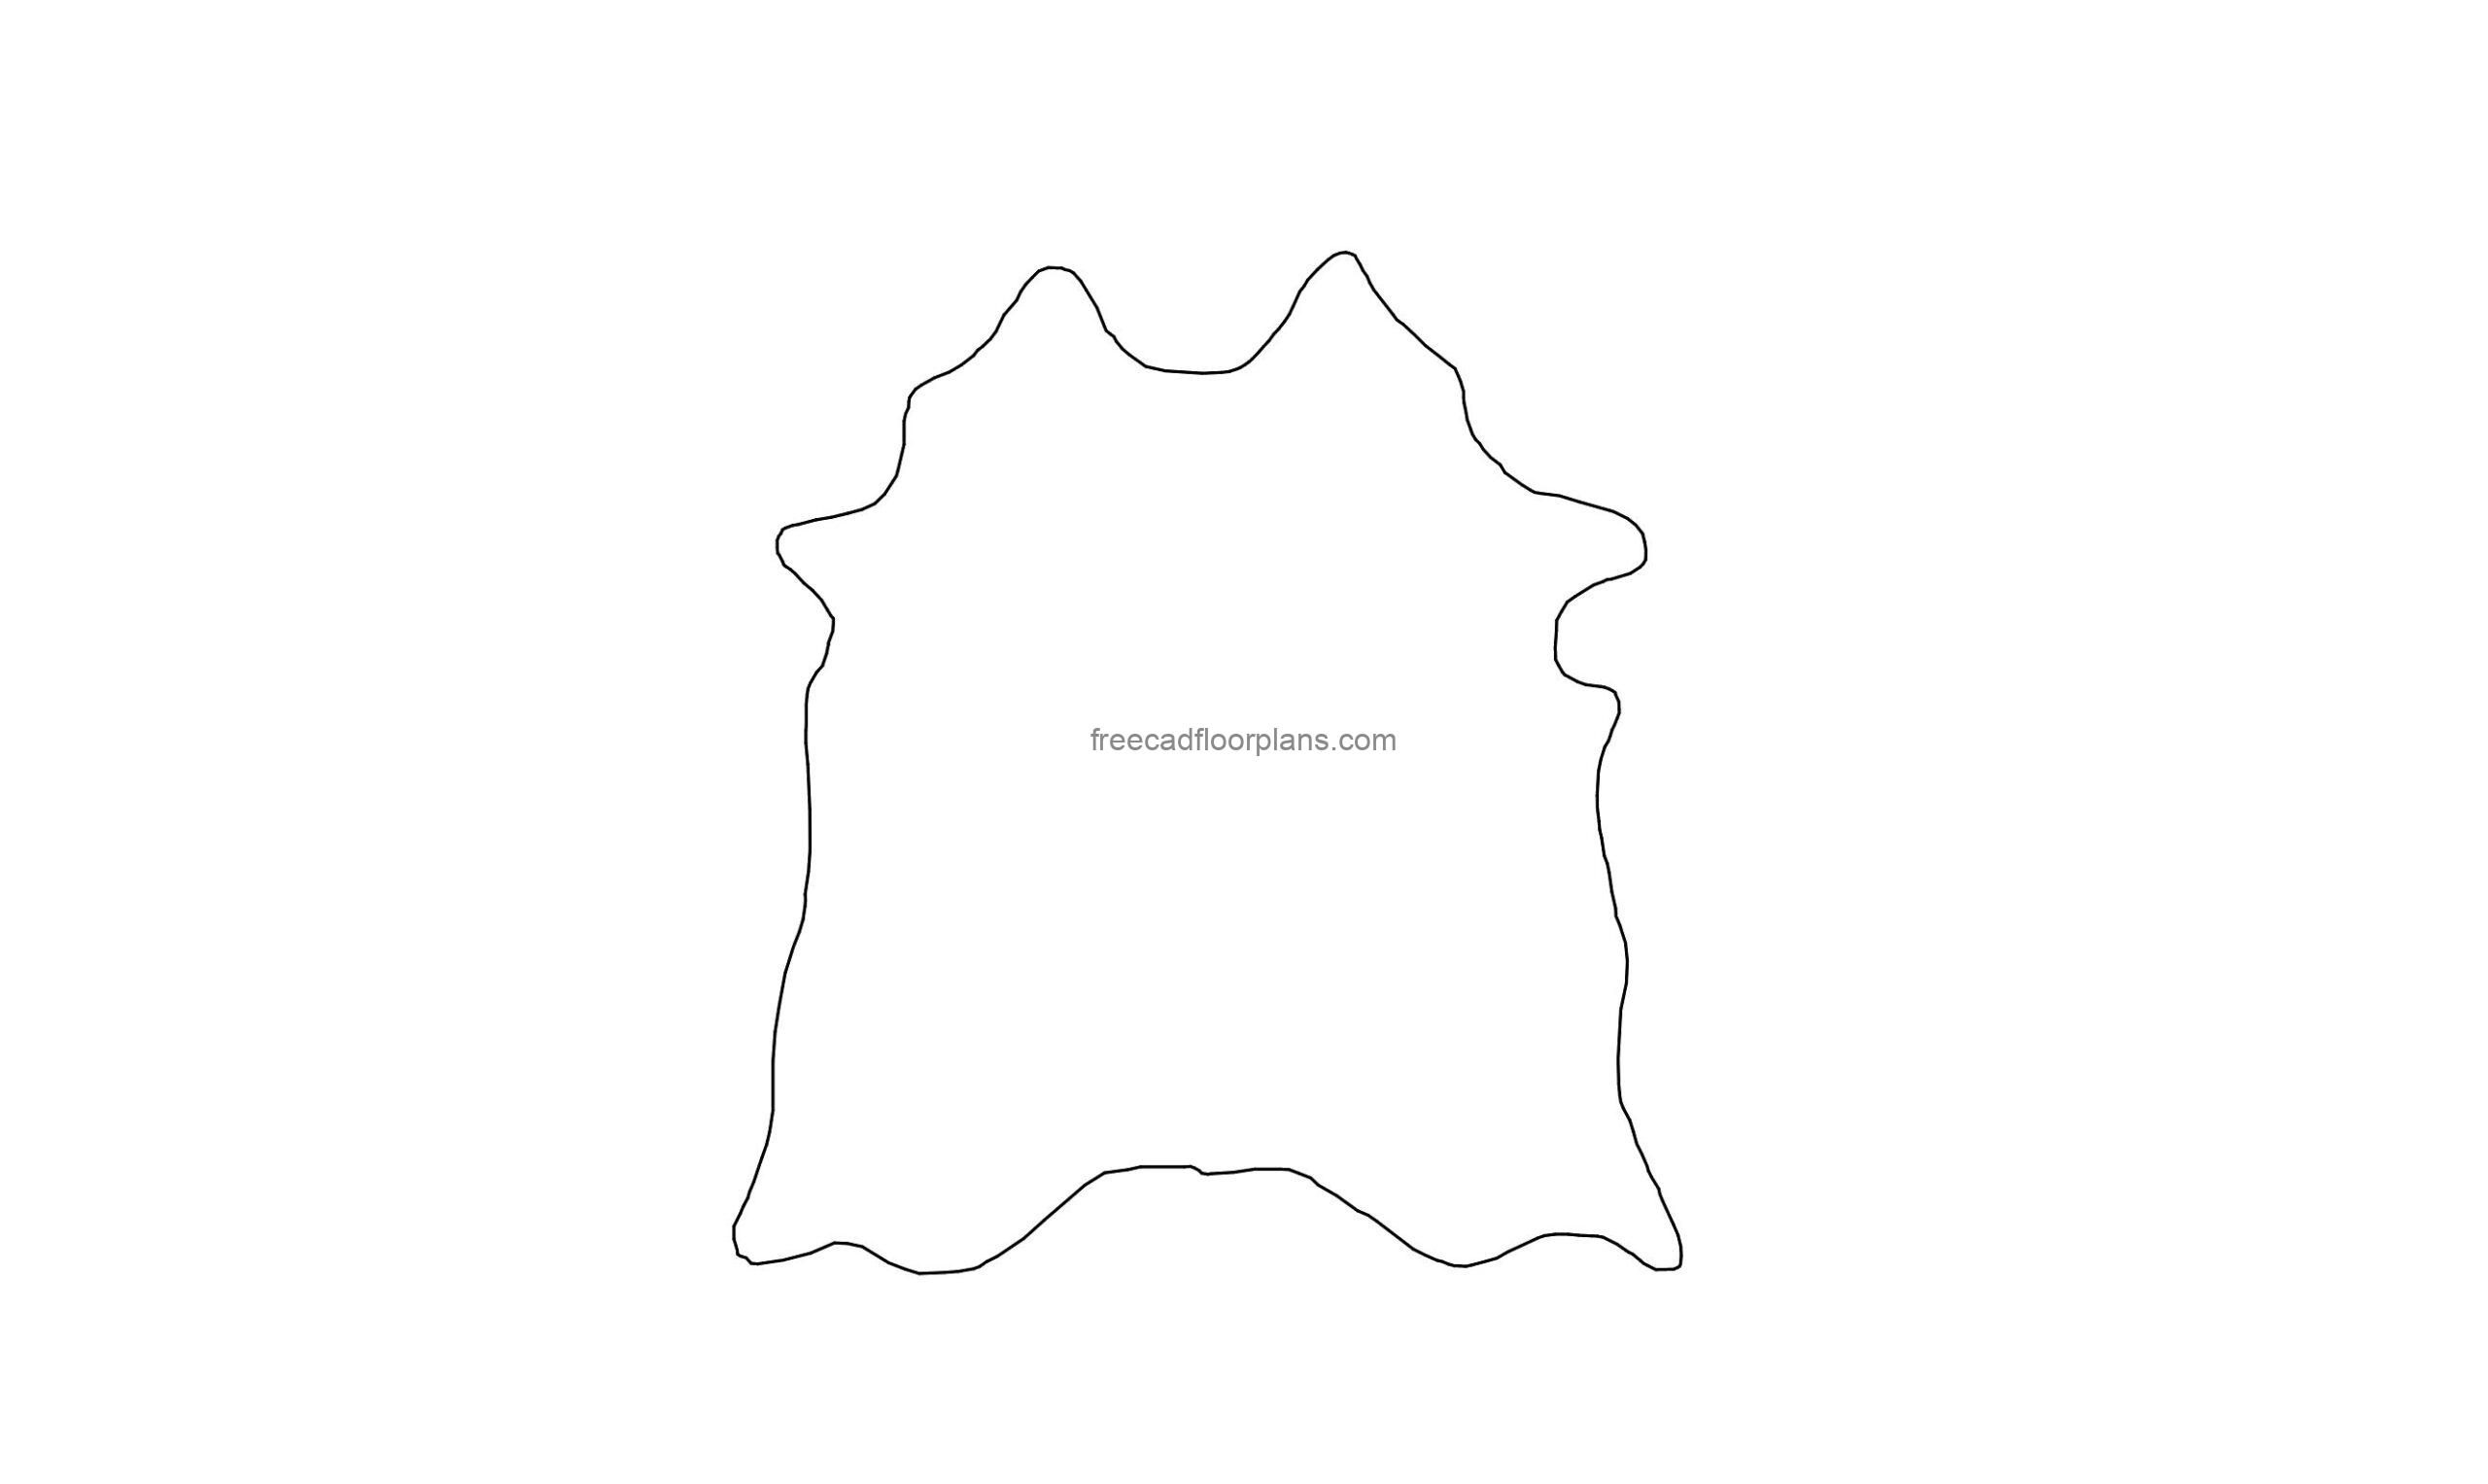 cowhide rug drawing plan dwg for free download